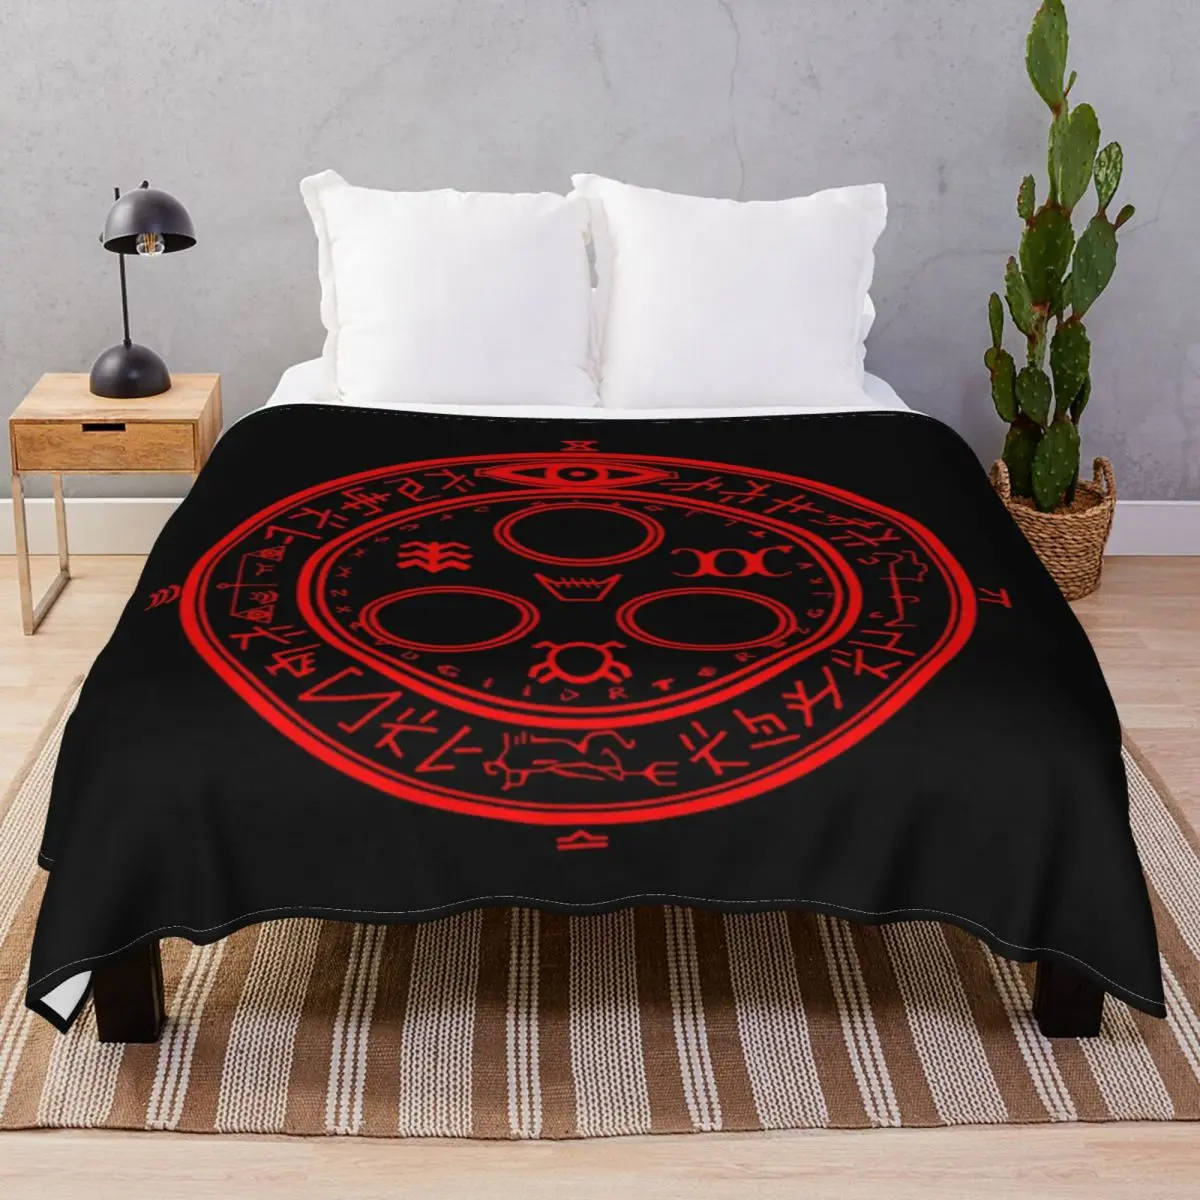 Halo Of The Sun Blanket Coral Fleece Printed Multifunction Throw Blankets for Bedding Home Couch Travel Office